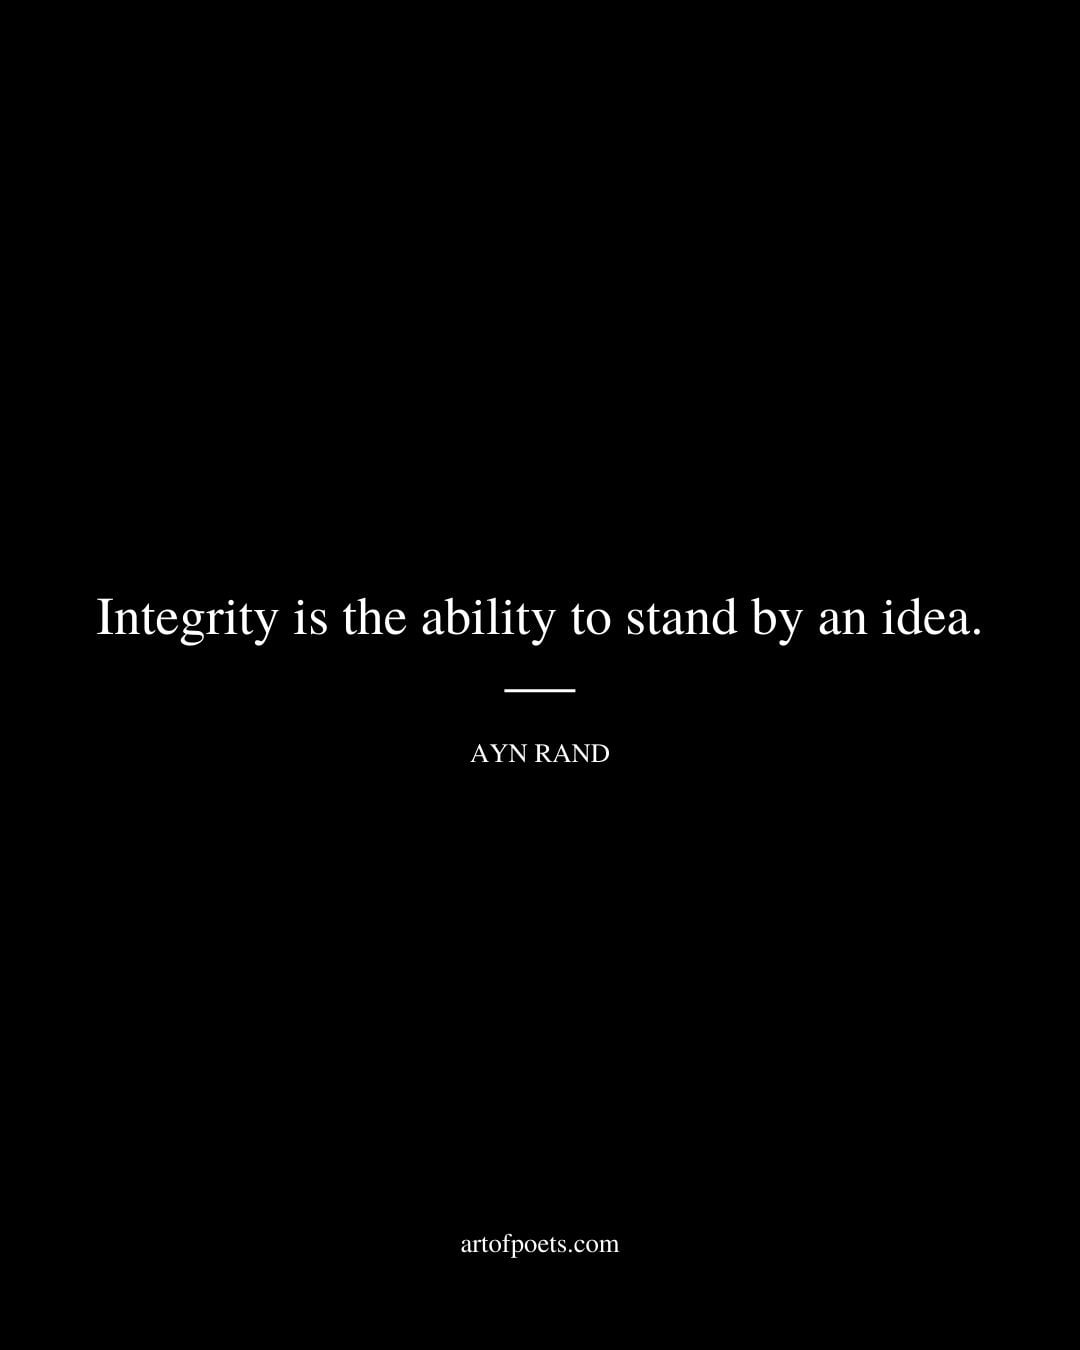 Integrity is the ability to stand by an idea